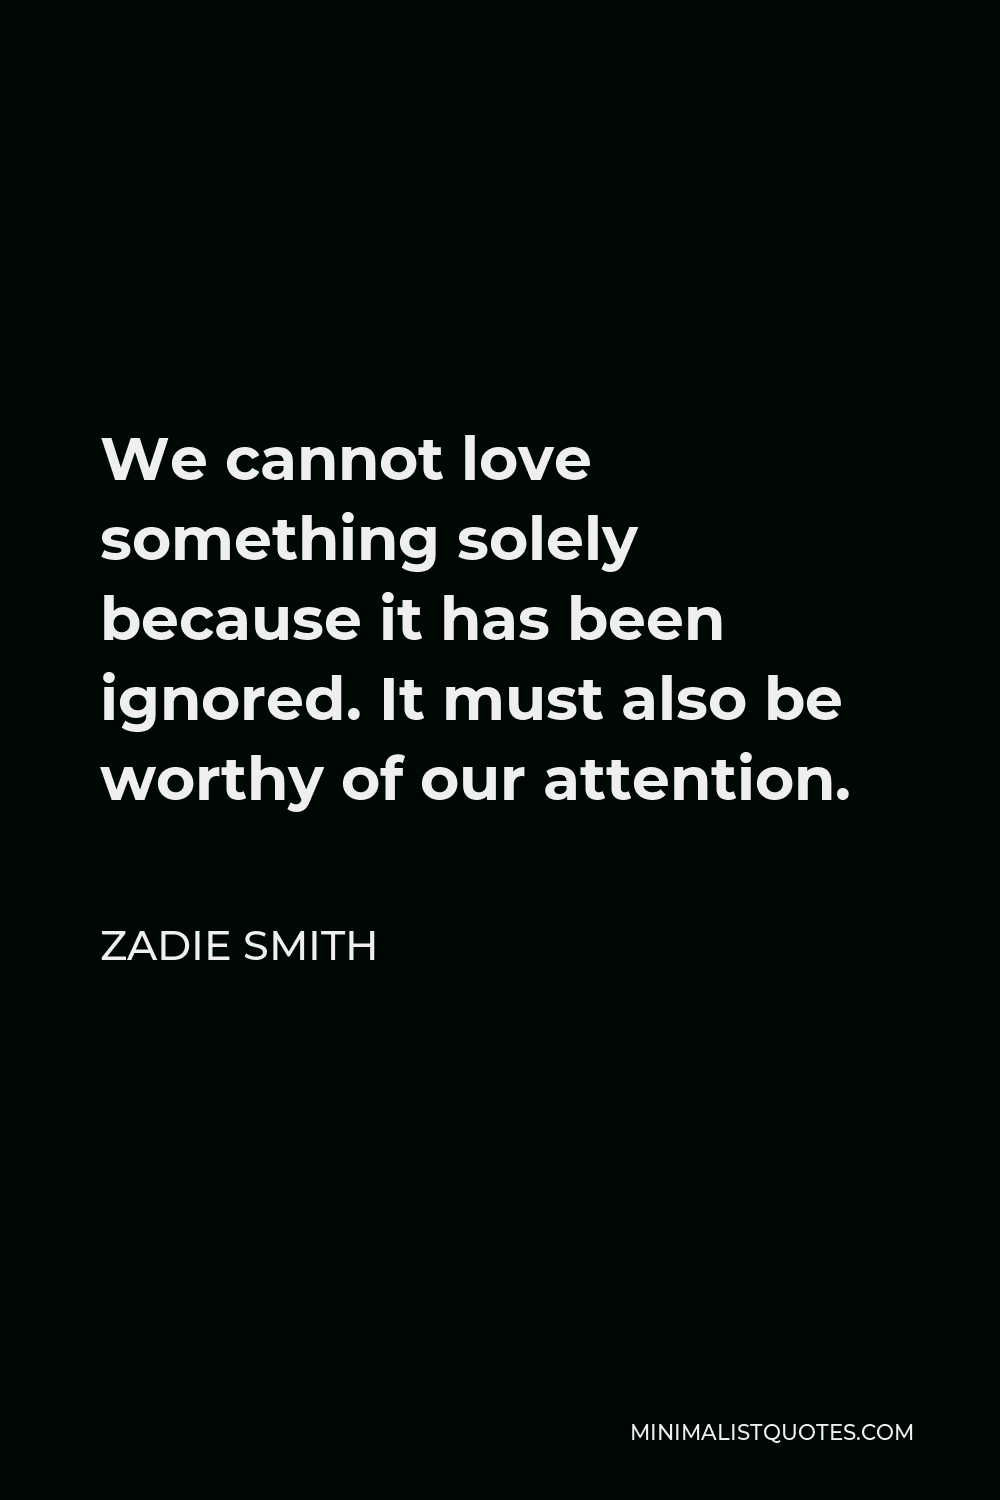 Zadie Smith Quote - We cannot love something solely because it has been ignored. It must also be worthy of our attention.